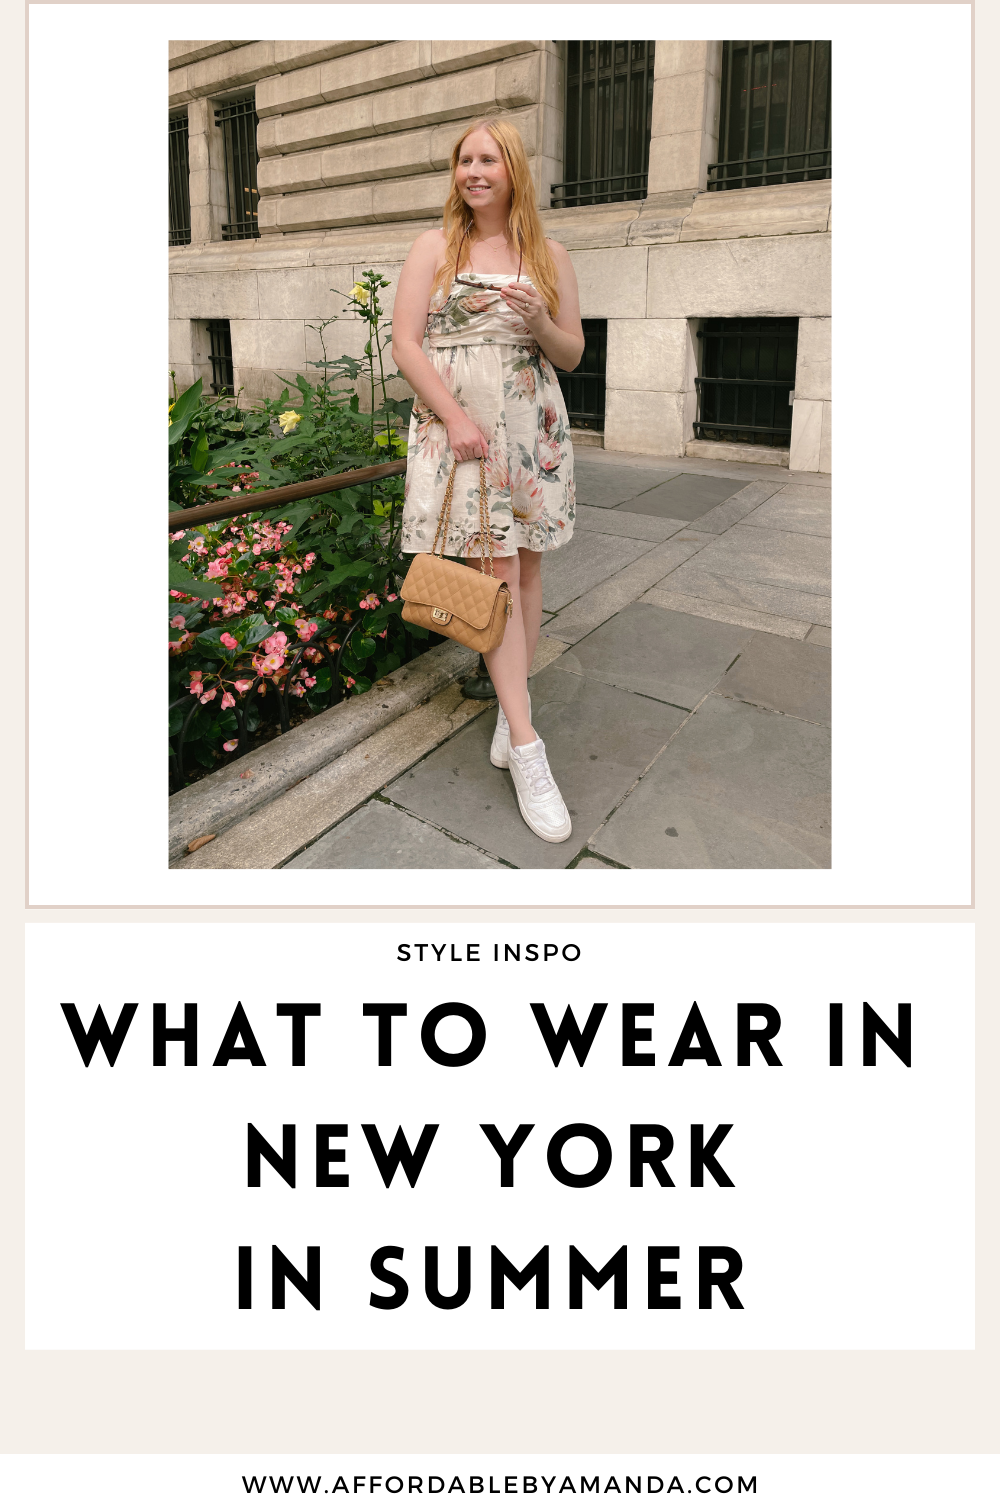 Things to do in NYC + What to Wear in the Summer